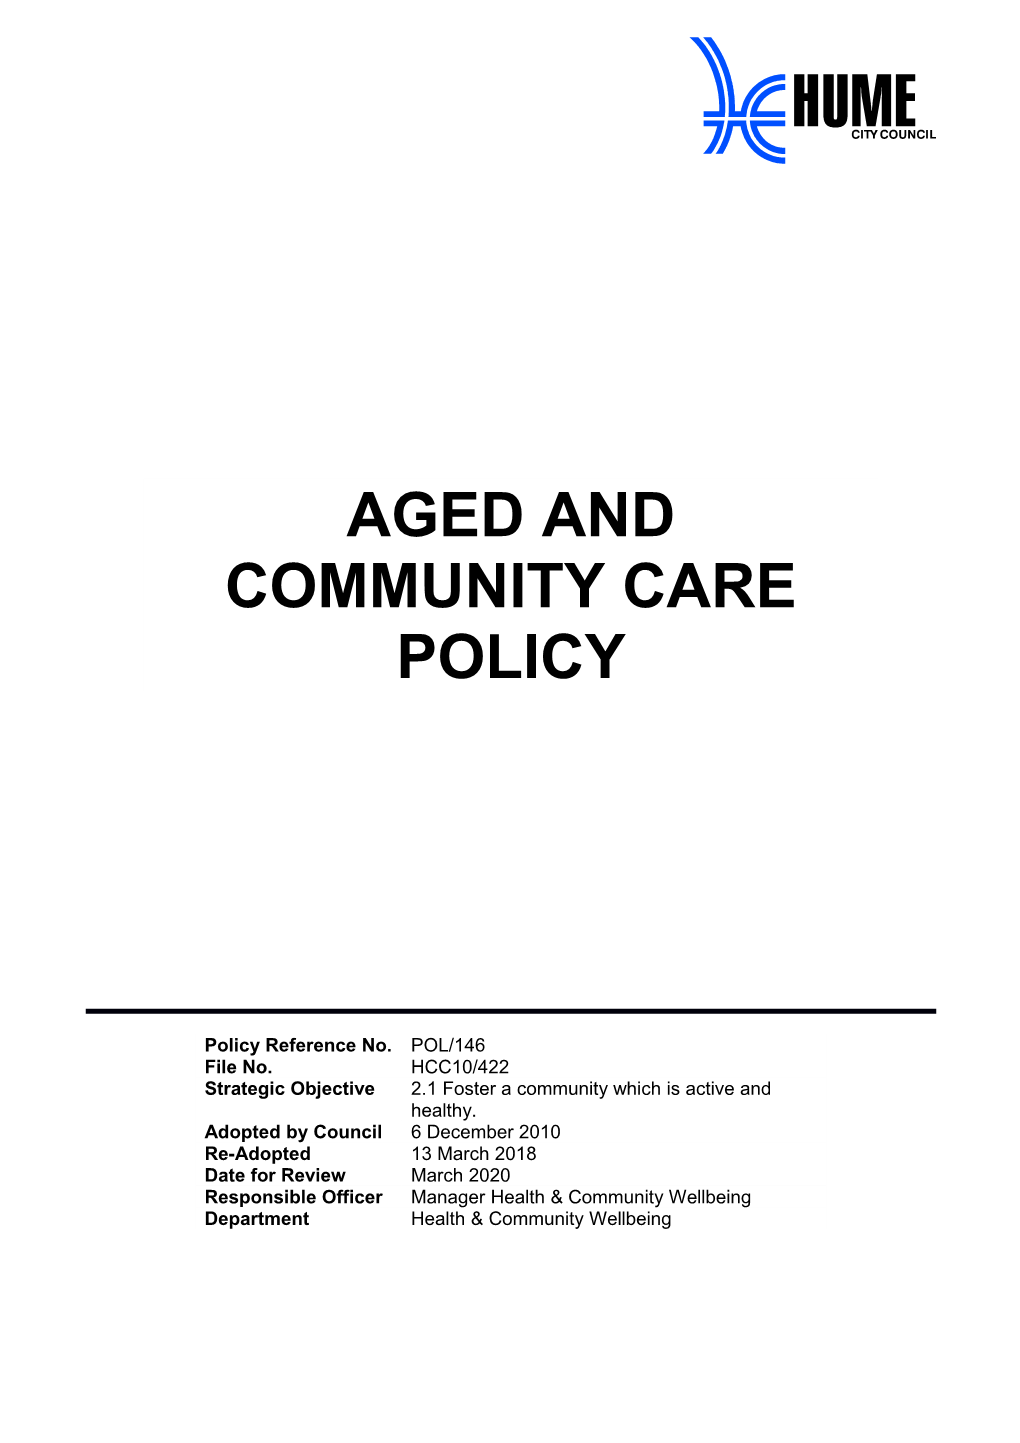 Aged and Community Care Policy